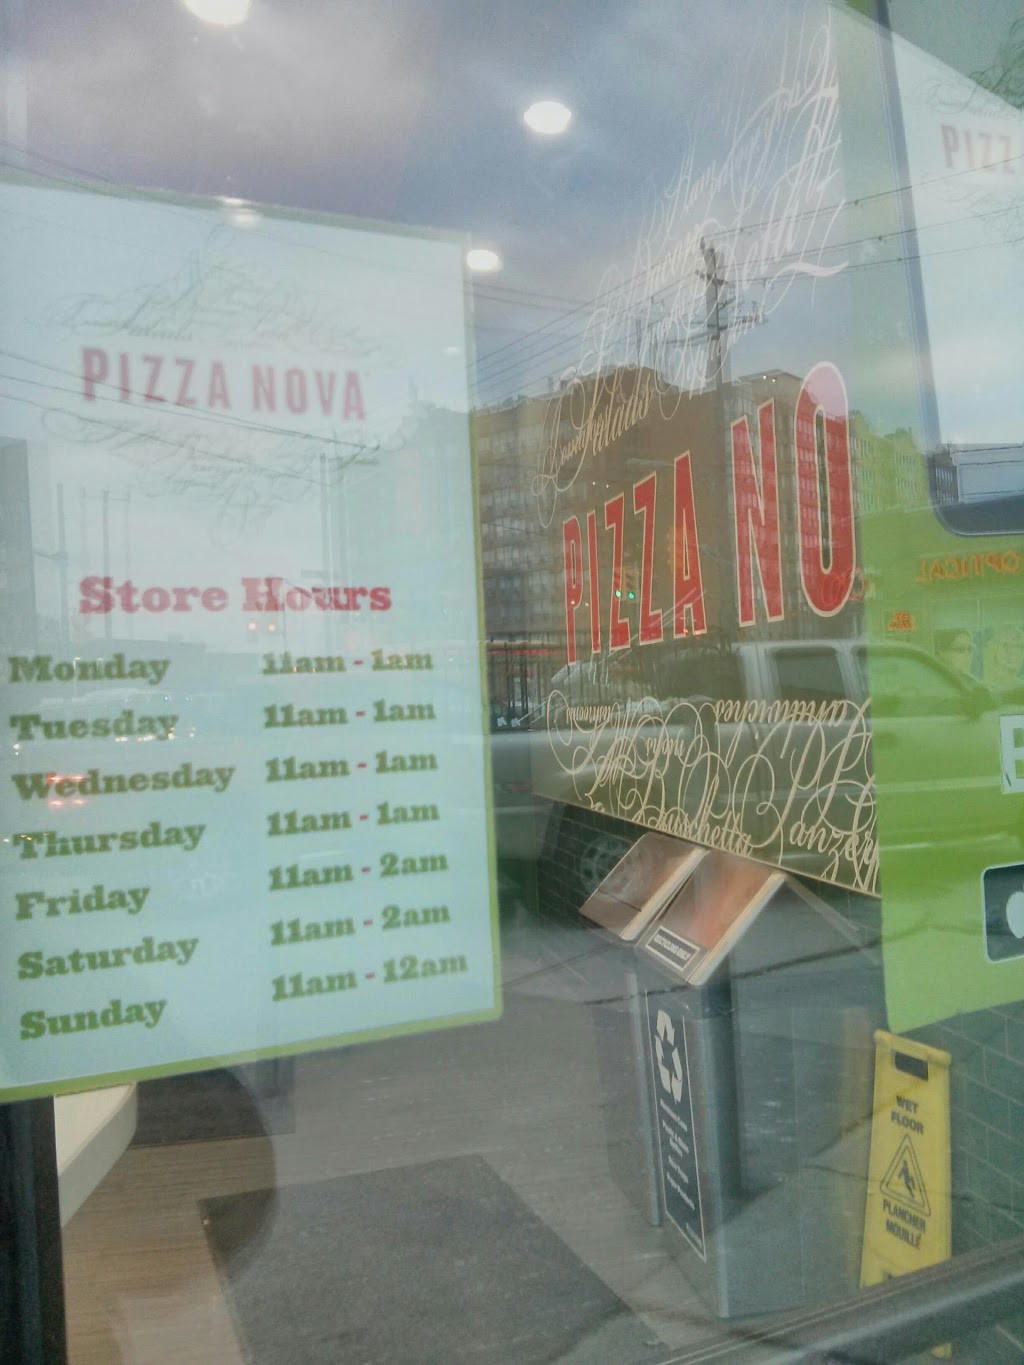 Pizza Nova | meal delivery | 577 Rogers Rd, York, ON M6M 1B7, Canada | 4164390000 OR +1 416-439-0000